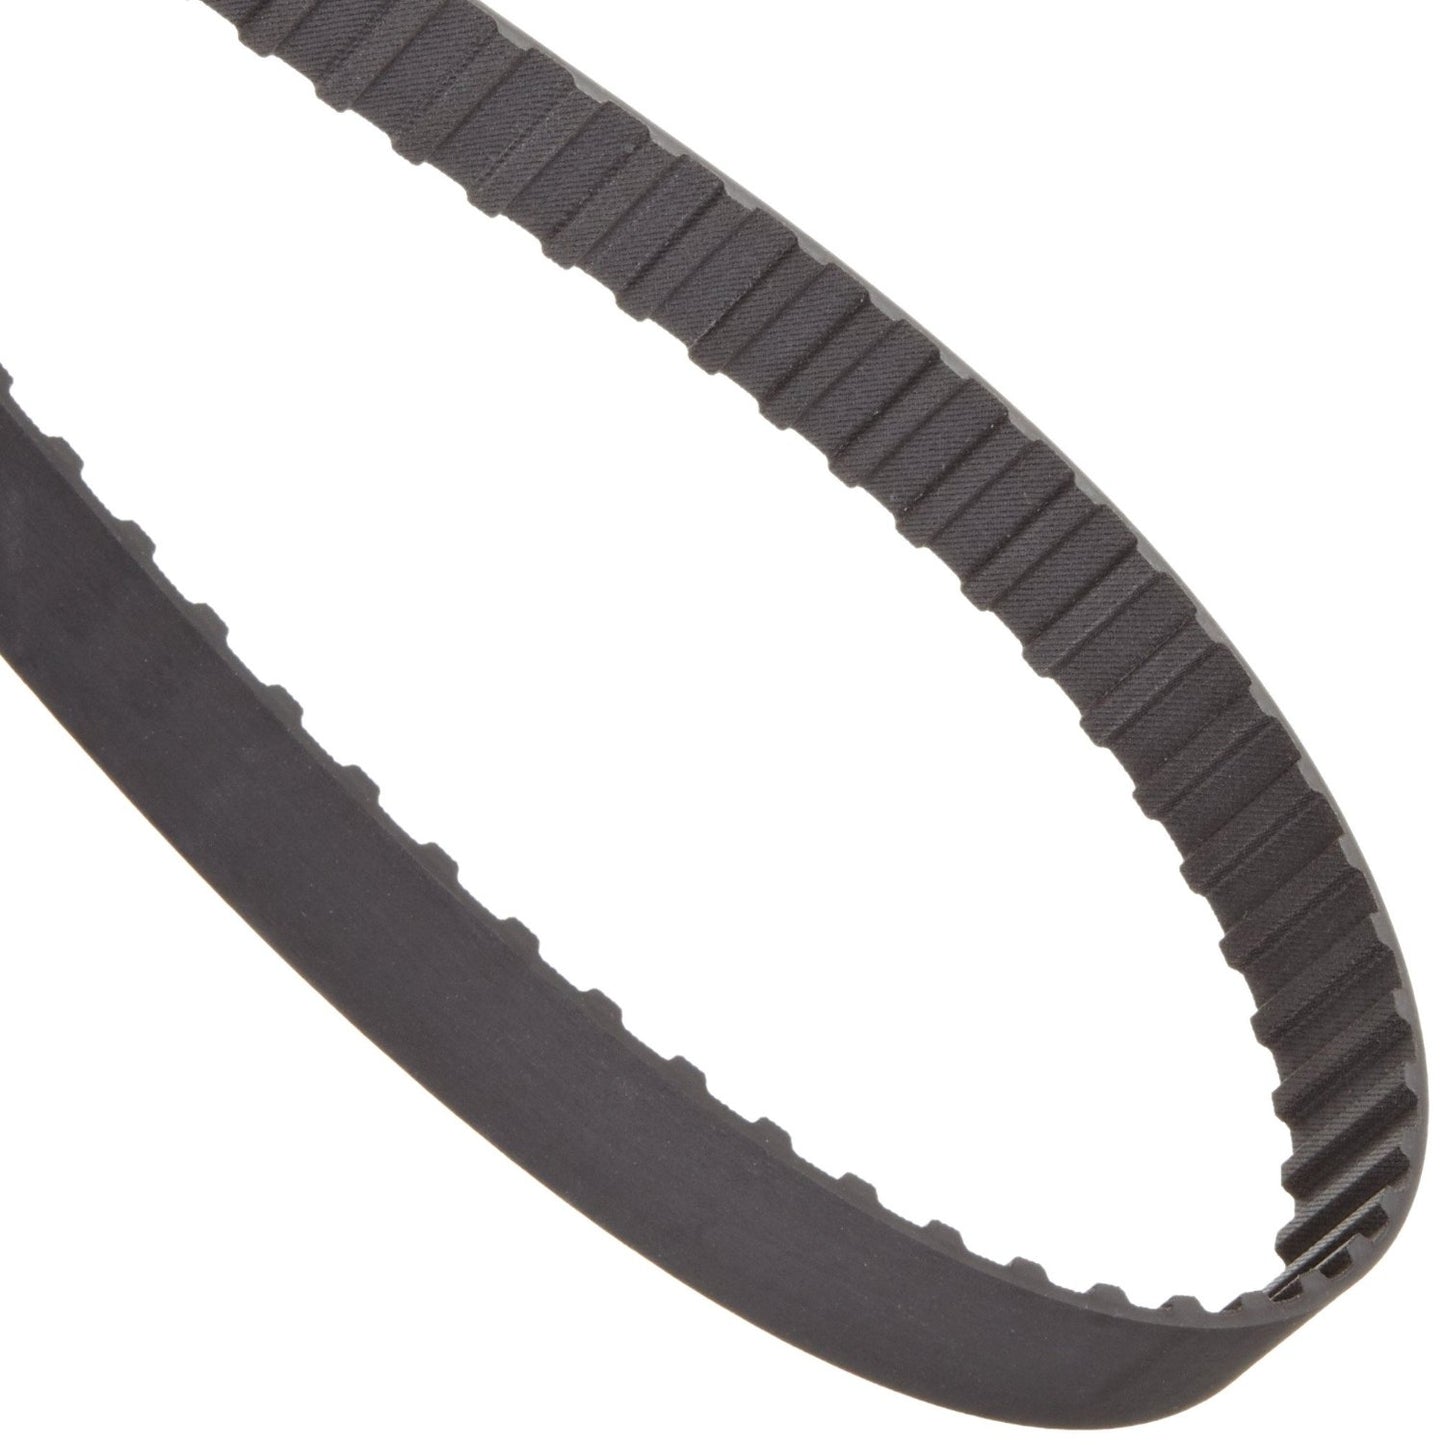 Westbend breadmaker Toothed Drive Belt 41063